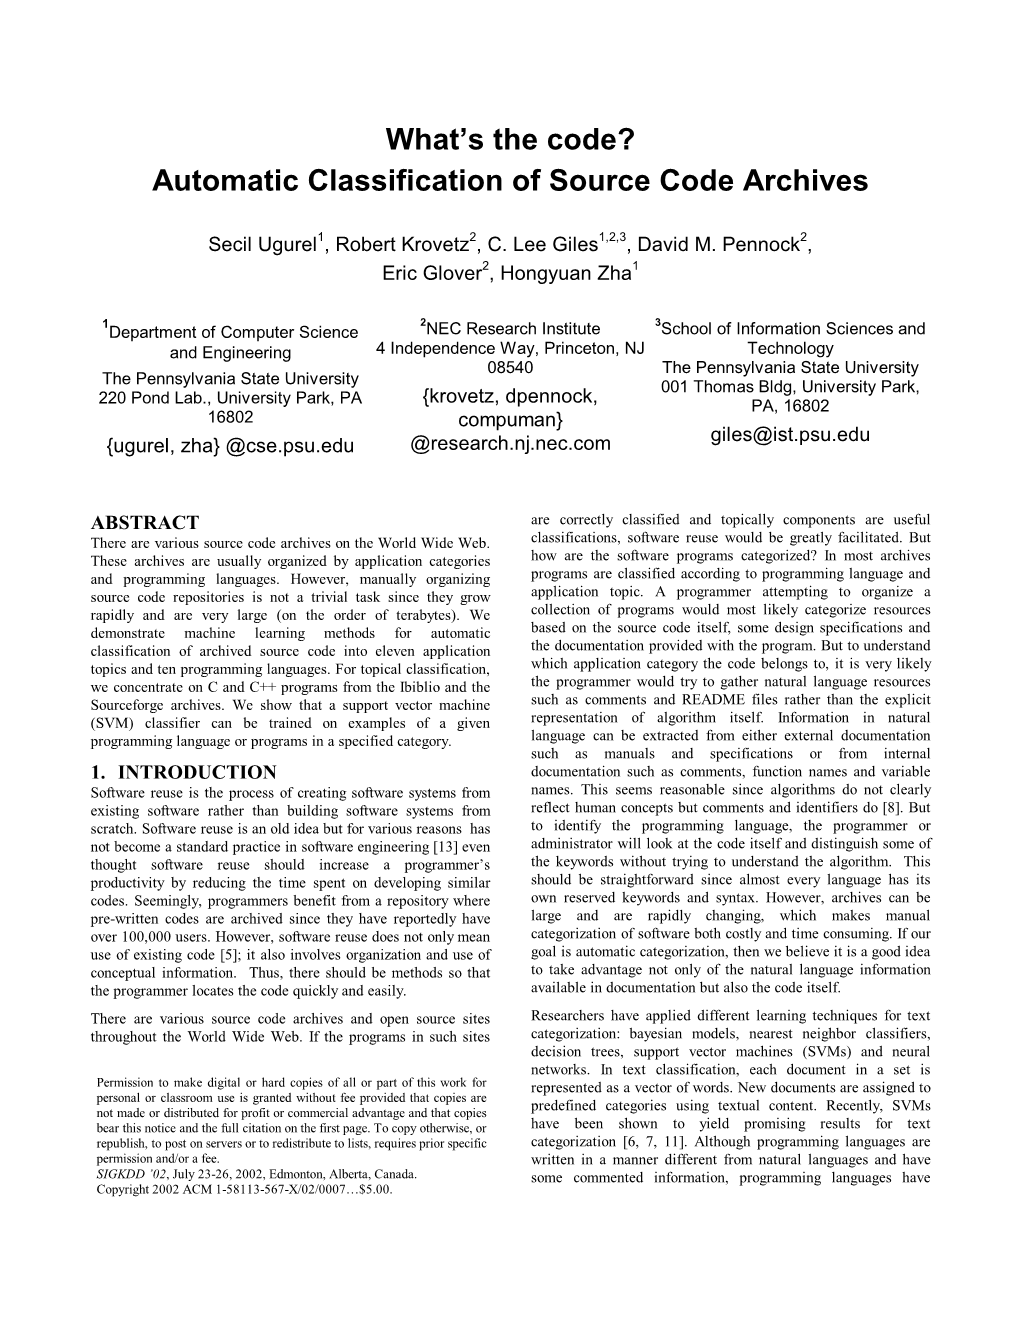 Automatic Classification of Source Code Archives